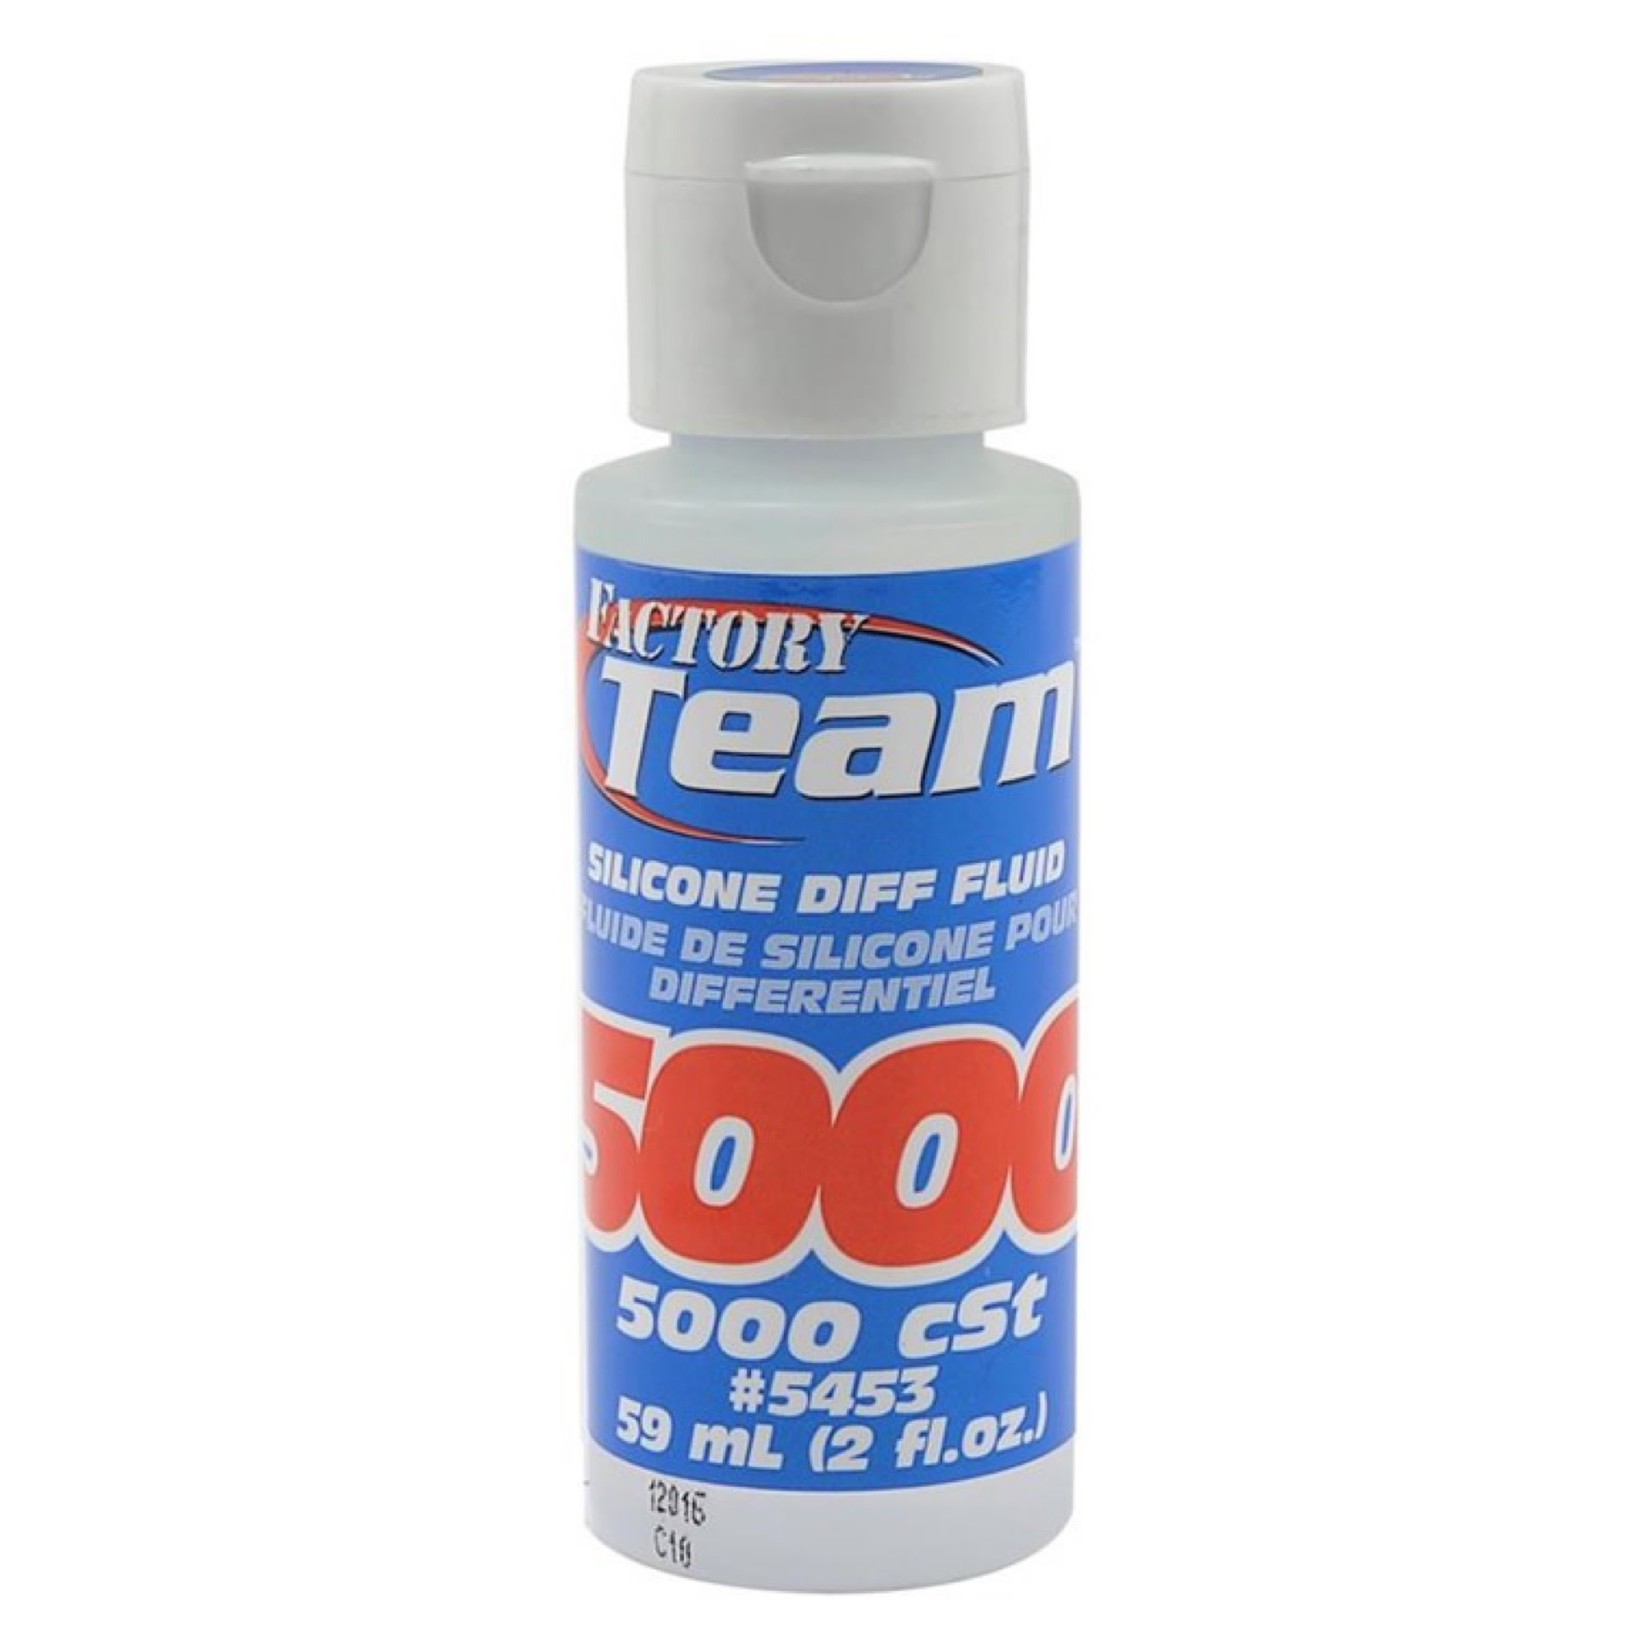 Team Associated Team Associated Silicone Differential Fluid (2oz) (5,000cst) #5453